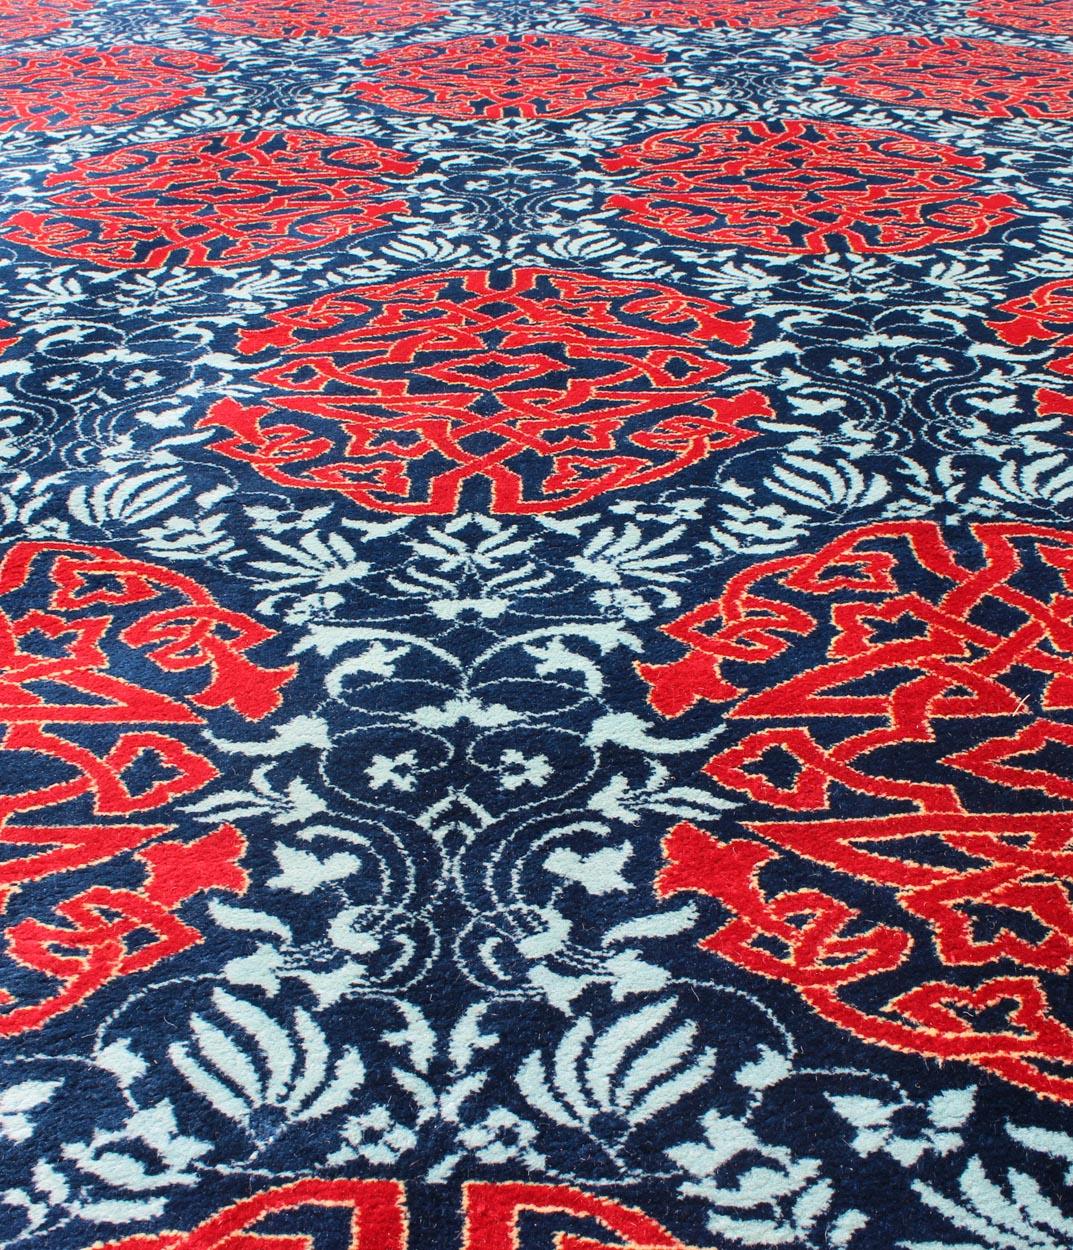 Red & Blue European Fine Rug with Geometric Medallions and Vining Blossoms For Sale 3